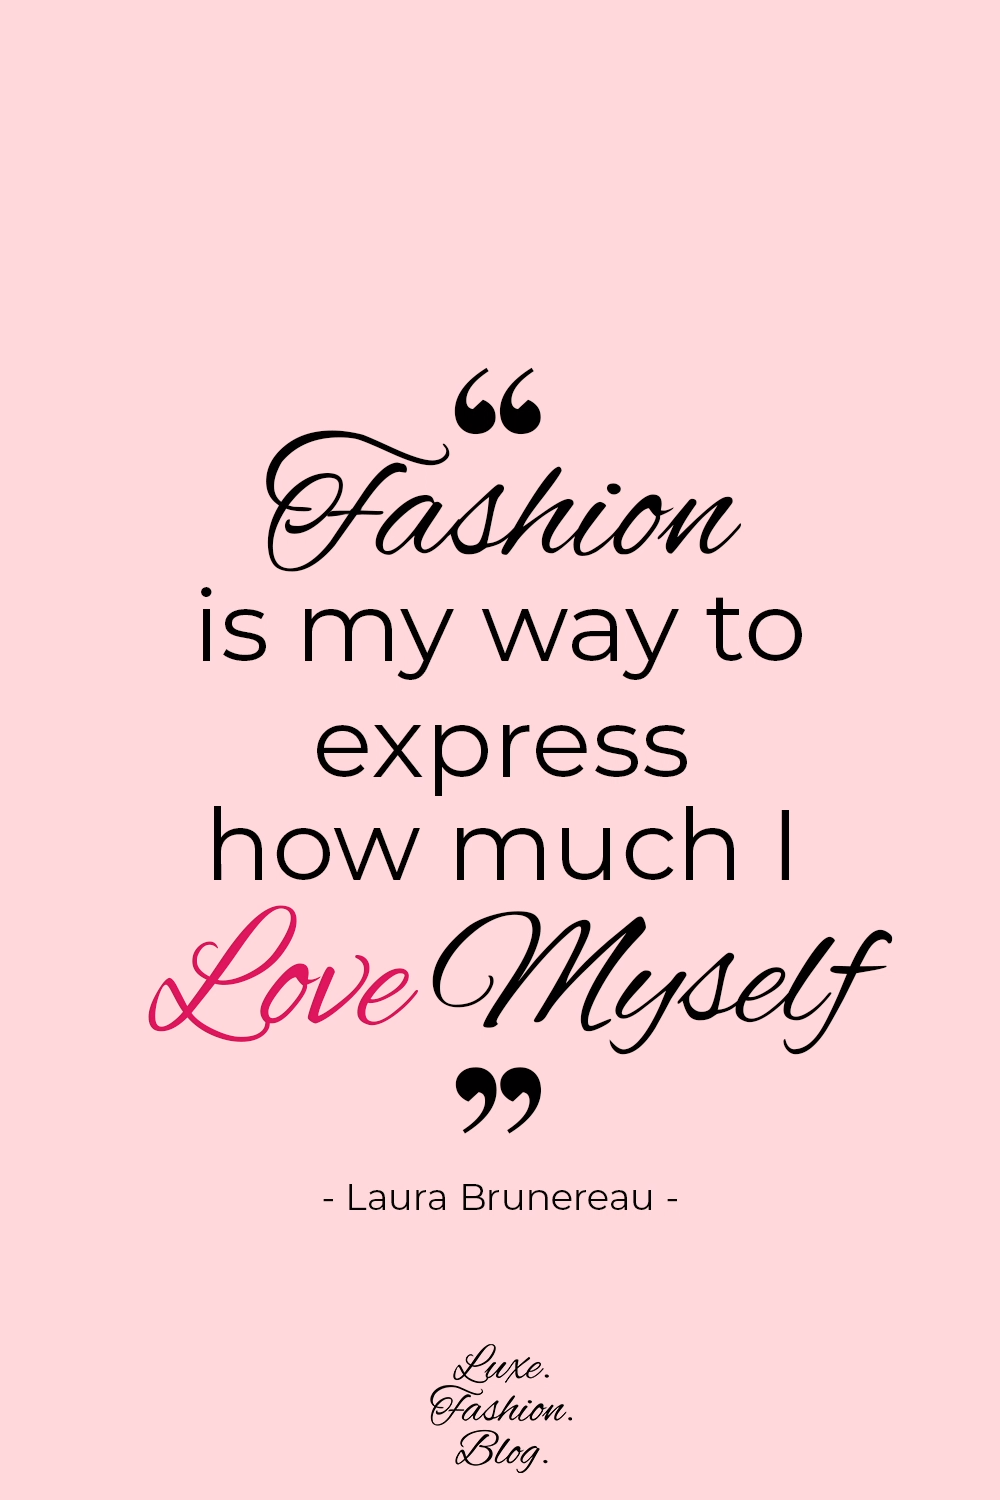 Love for Fashion Quotes - St. Valentine's Day | Quotes Self Love | LuxeFashionBlog.com -   15 skin care Quotes funny ideas